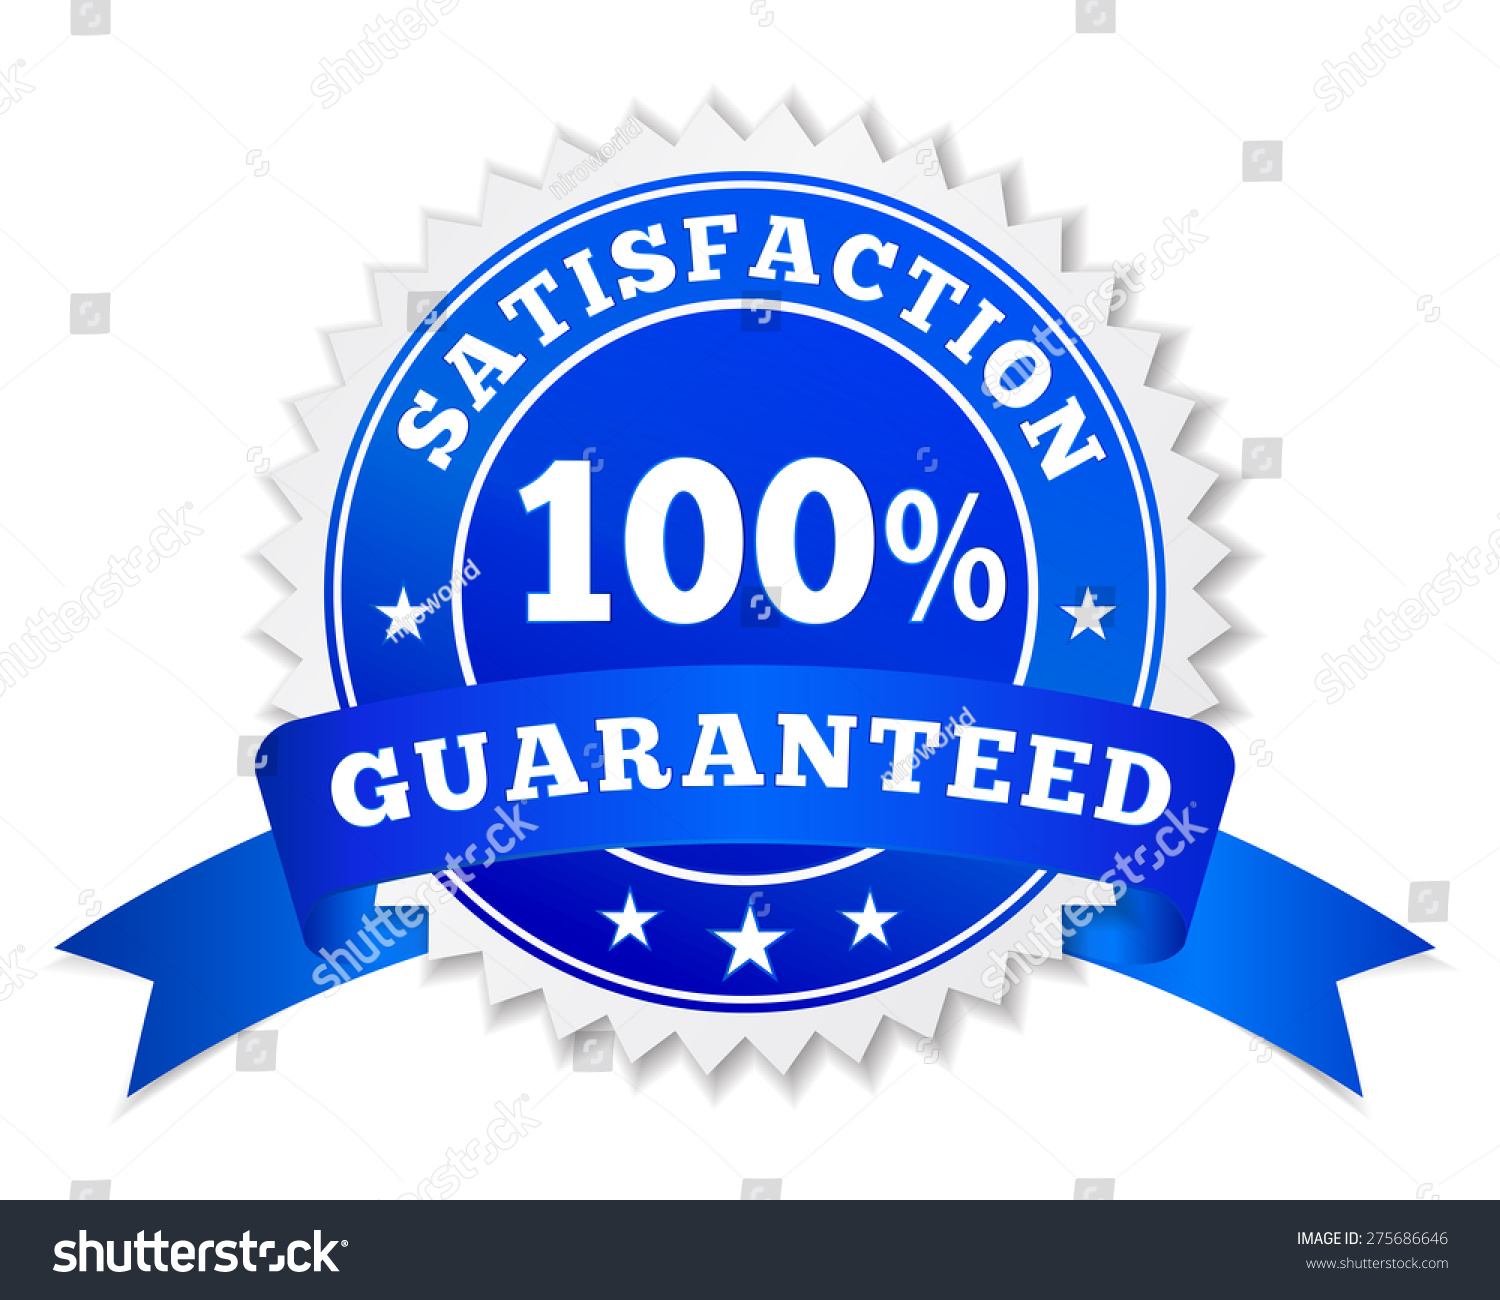 Vector Badge And Label Satisfaction Guaranteed Colored In Blue With ...